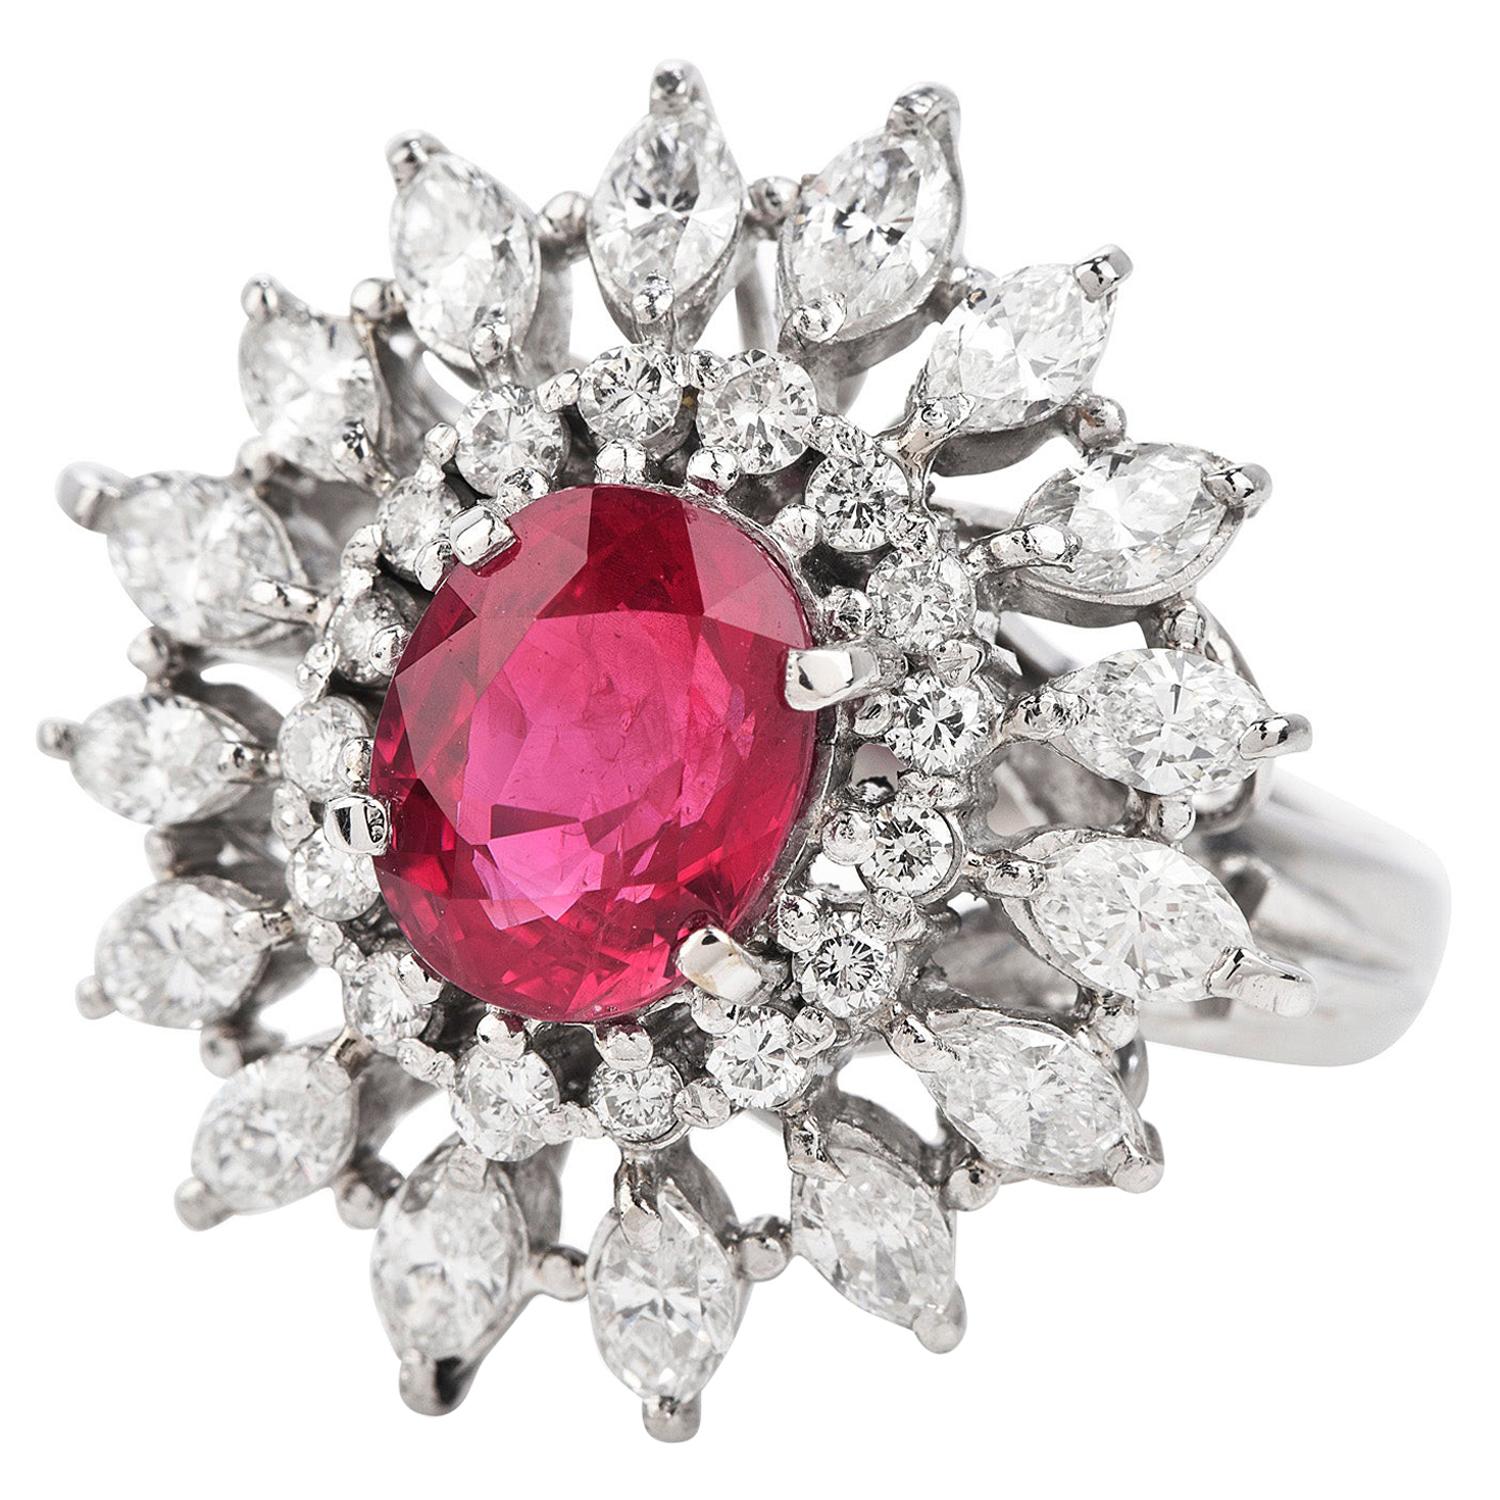 Retro-inspired Starburst Cocktail Ring is Stunning

Features GIA Genuine Ruby and Diamonds expertly crafted in solid Platinum and an approximate total weight of 10.89 grams.

The exquisite center stone is an oval brilliant-cut Natural Corundum Ruby